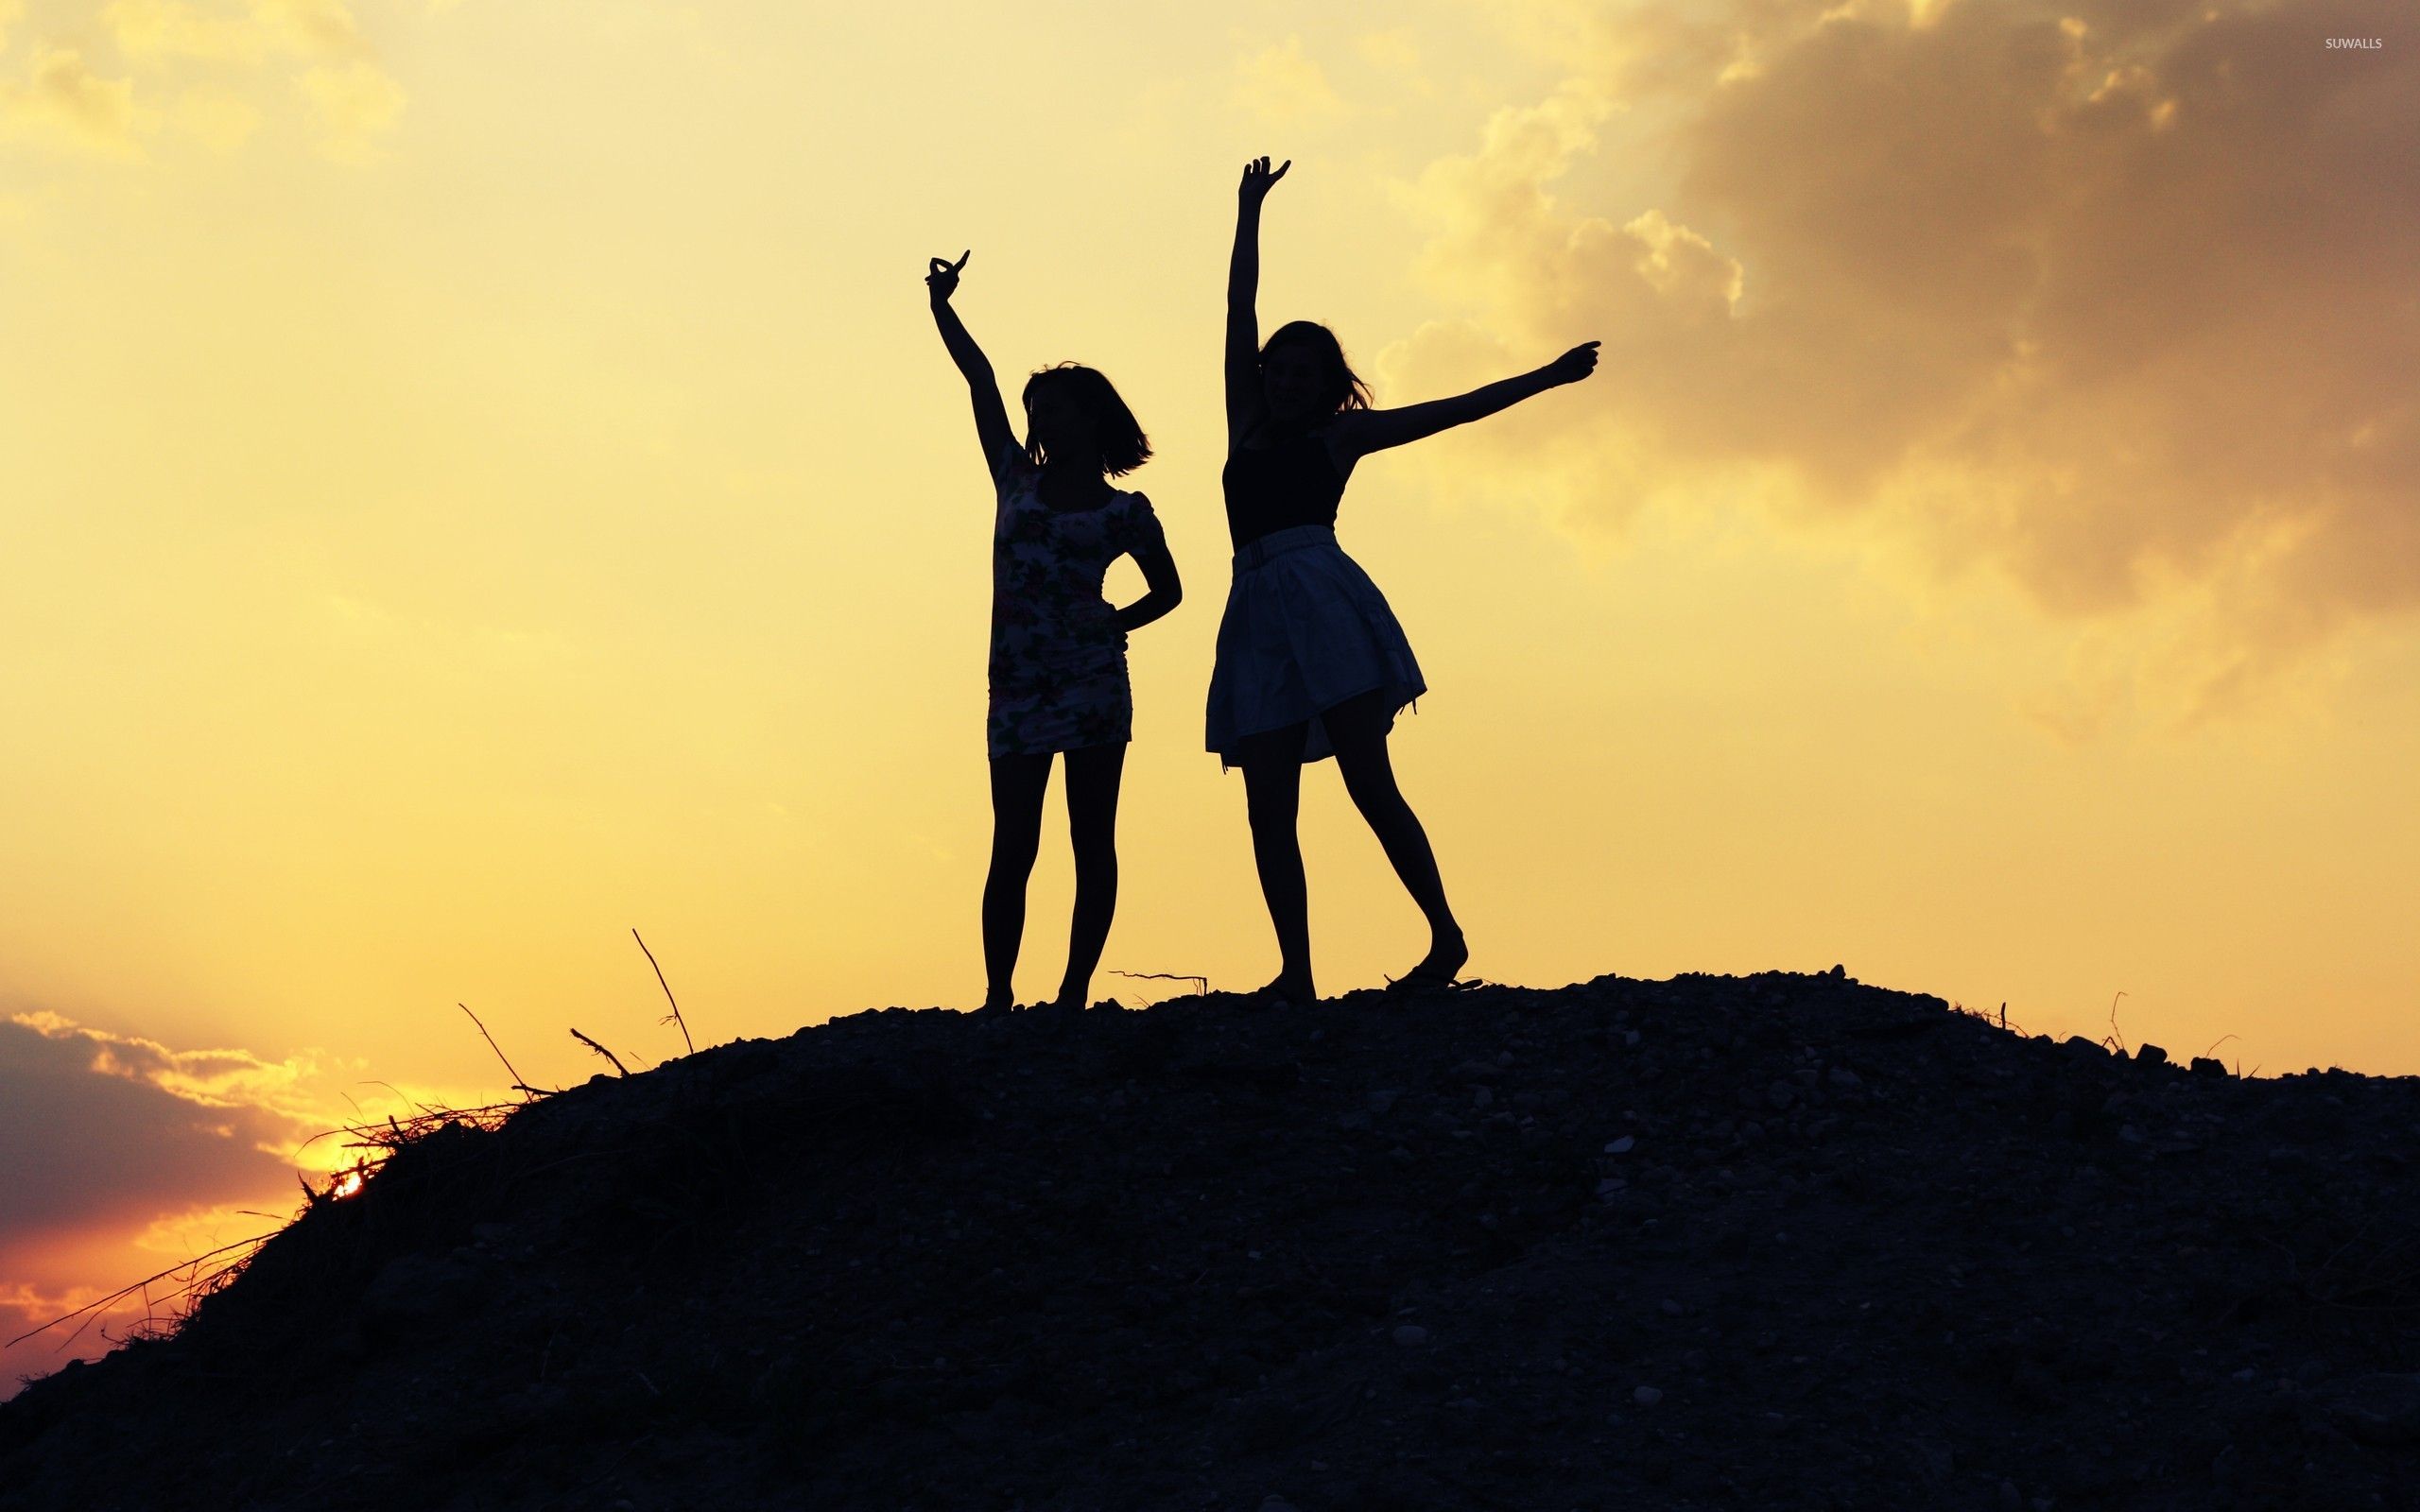 Girls' silhouettes in the sunset wallpaper wallpaper